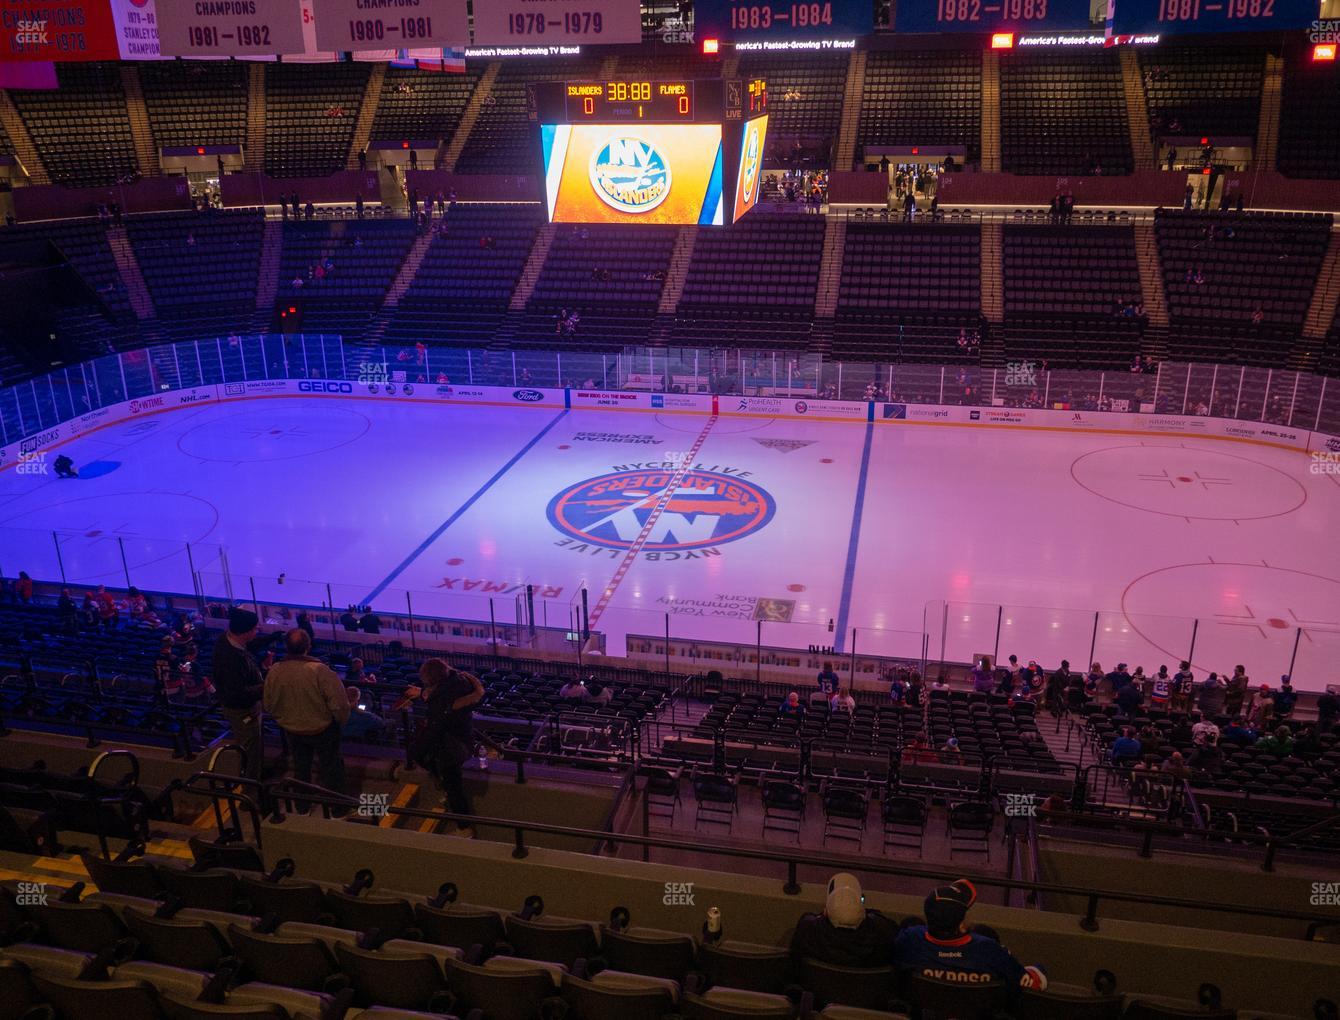 Nassau Coliseum Seating Chart Hockey With Rows